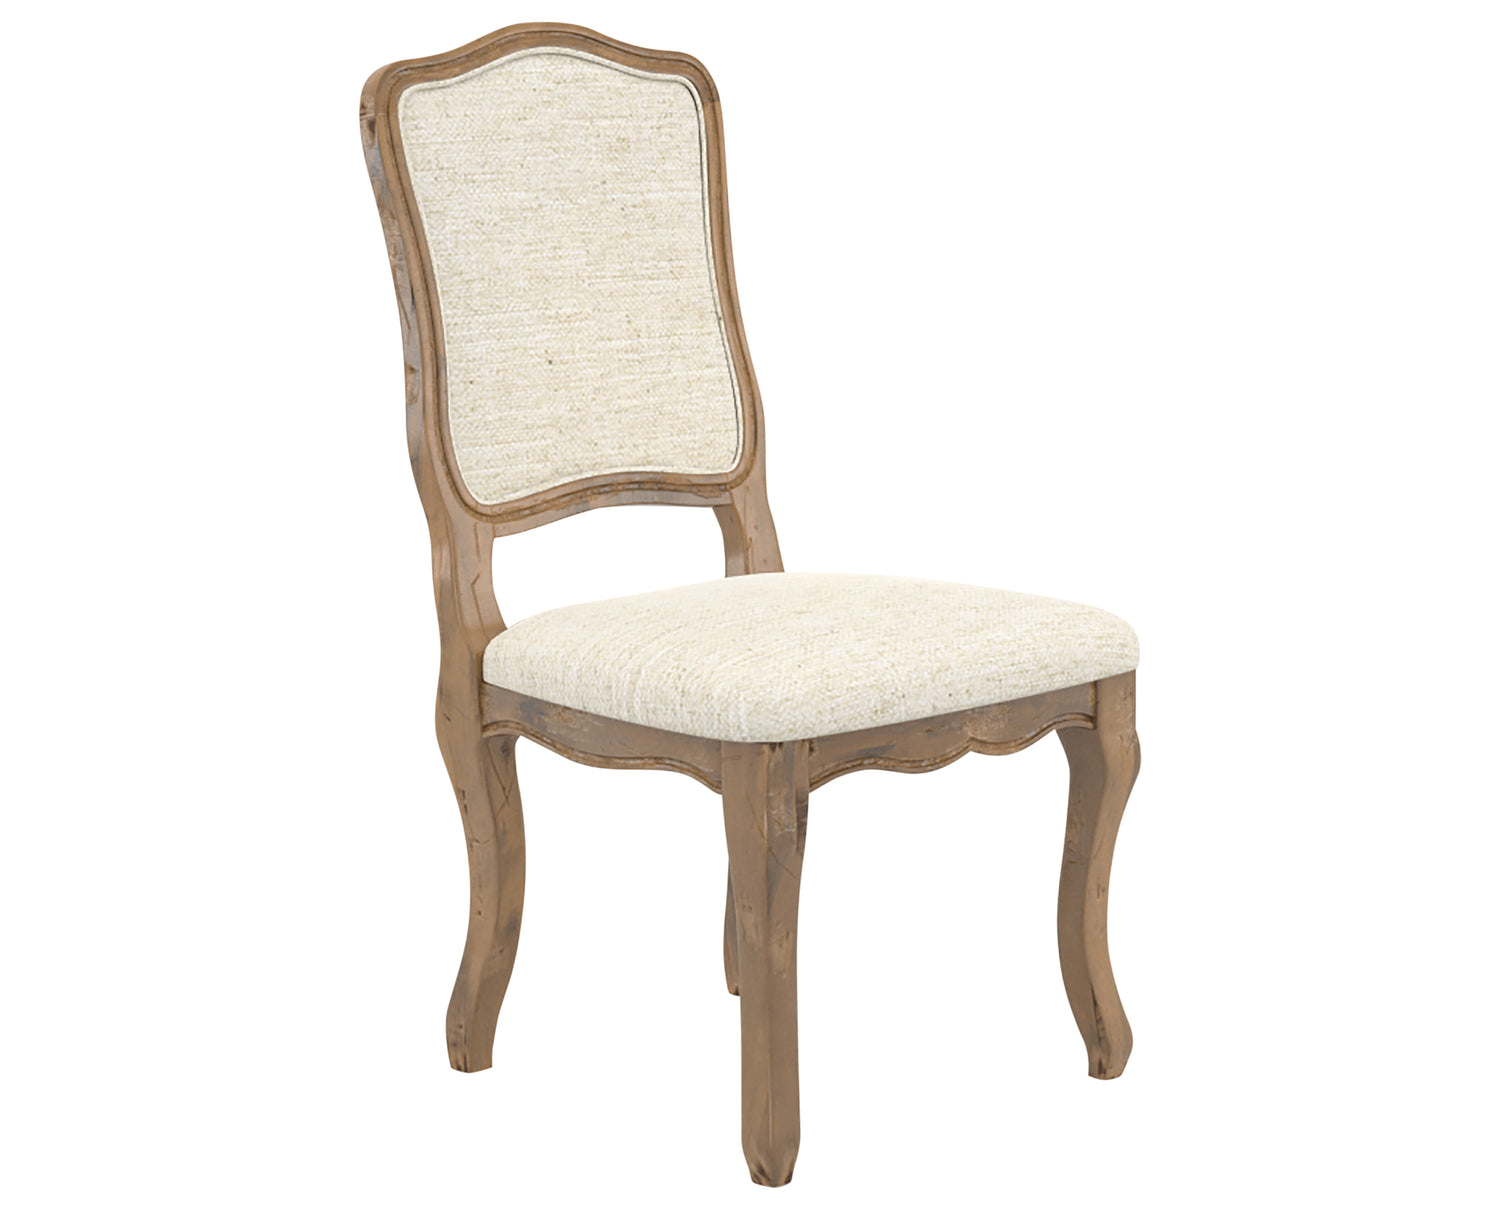 Oak Washed & Fabric TW | Canadel Champlain Dining Chair 316 | Valley Ridge Furniture